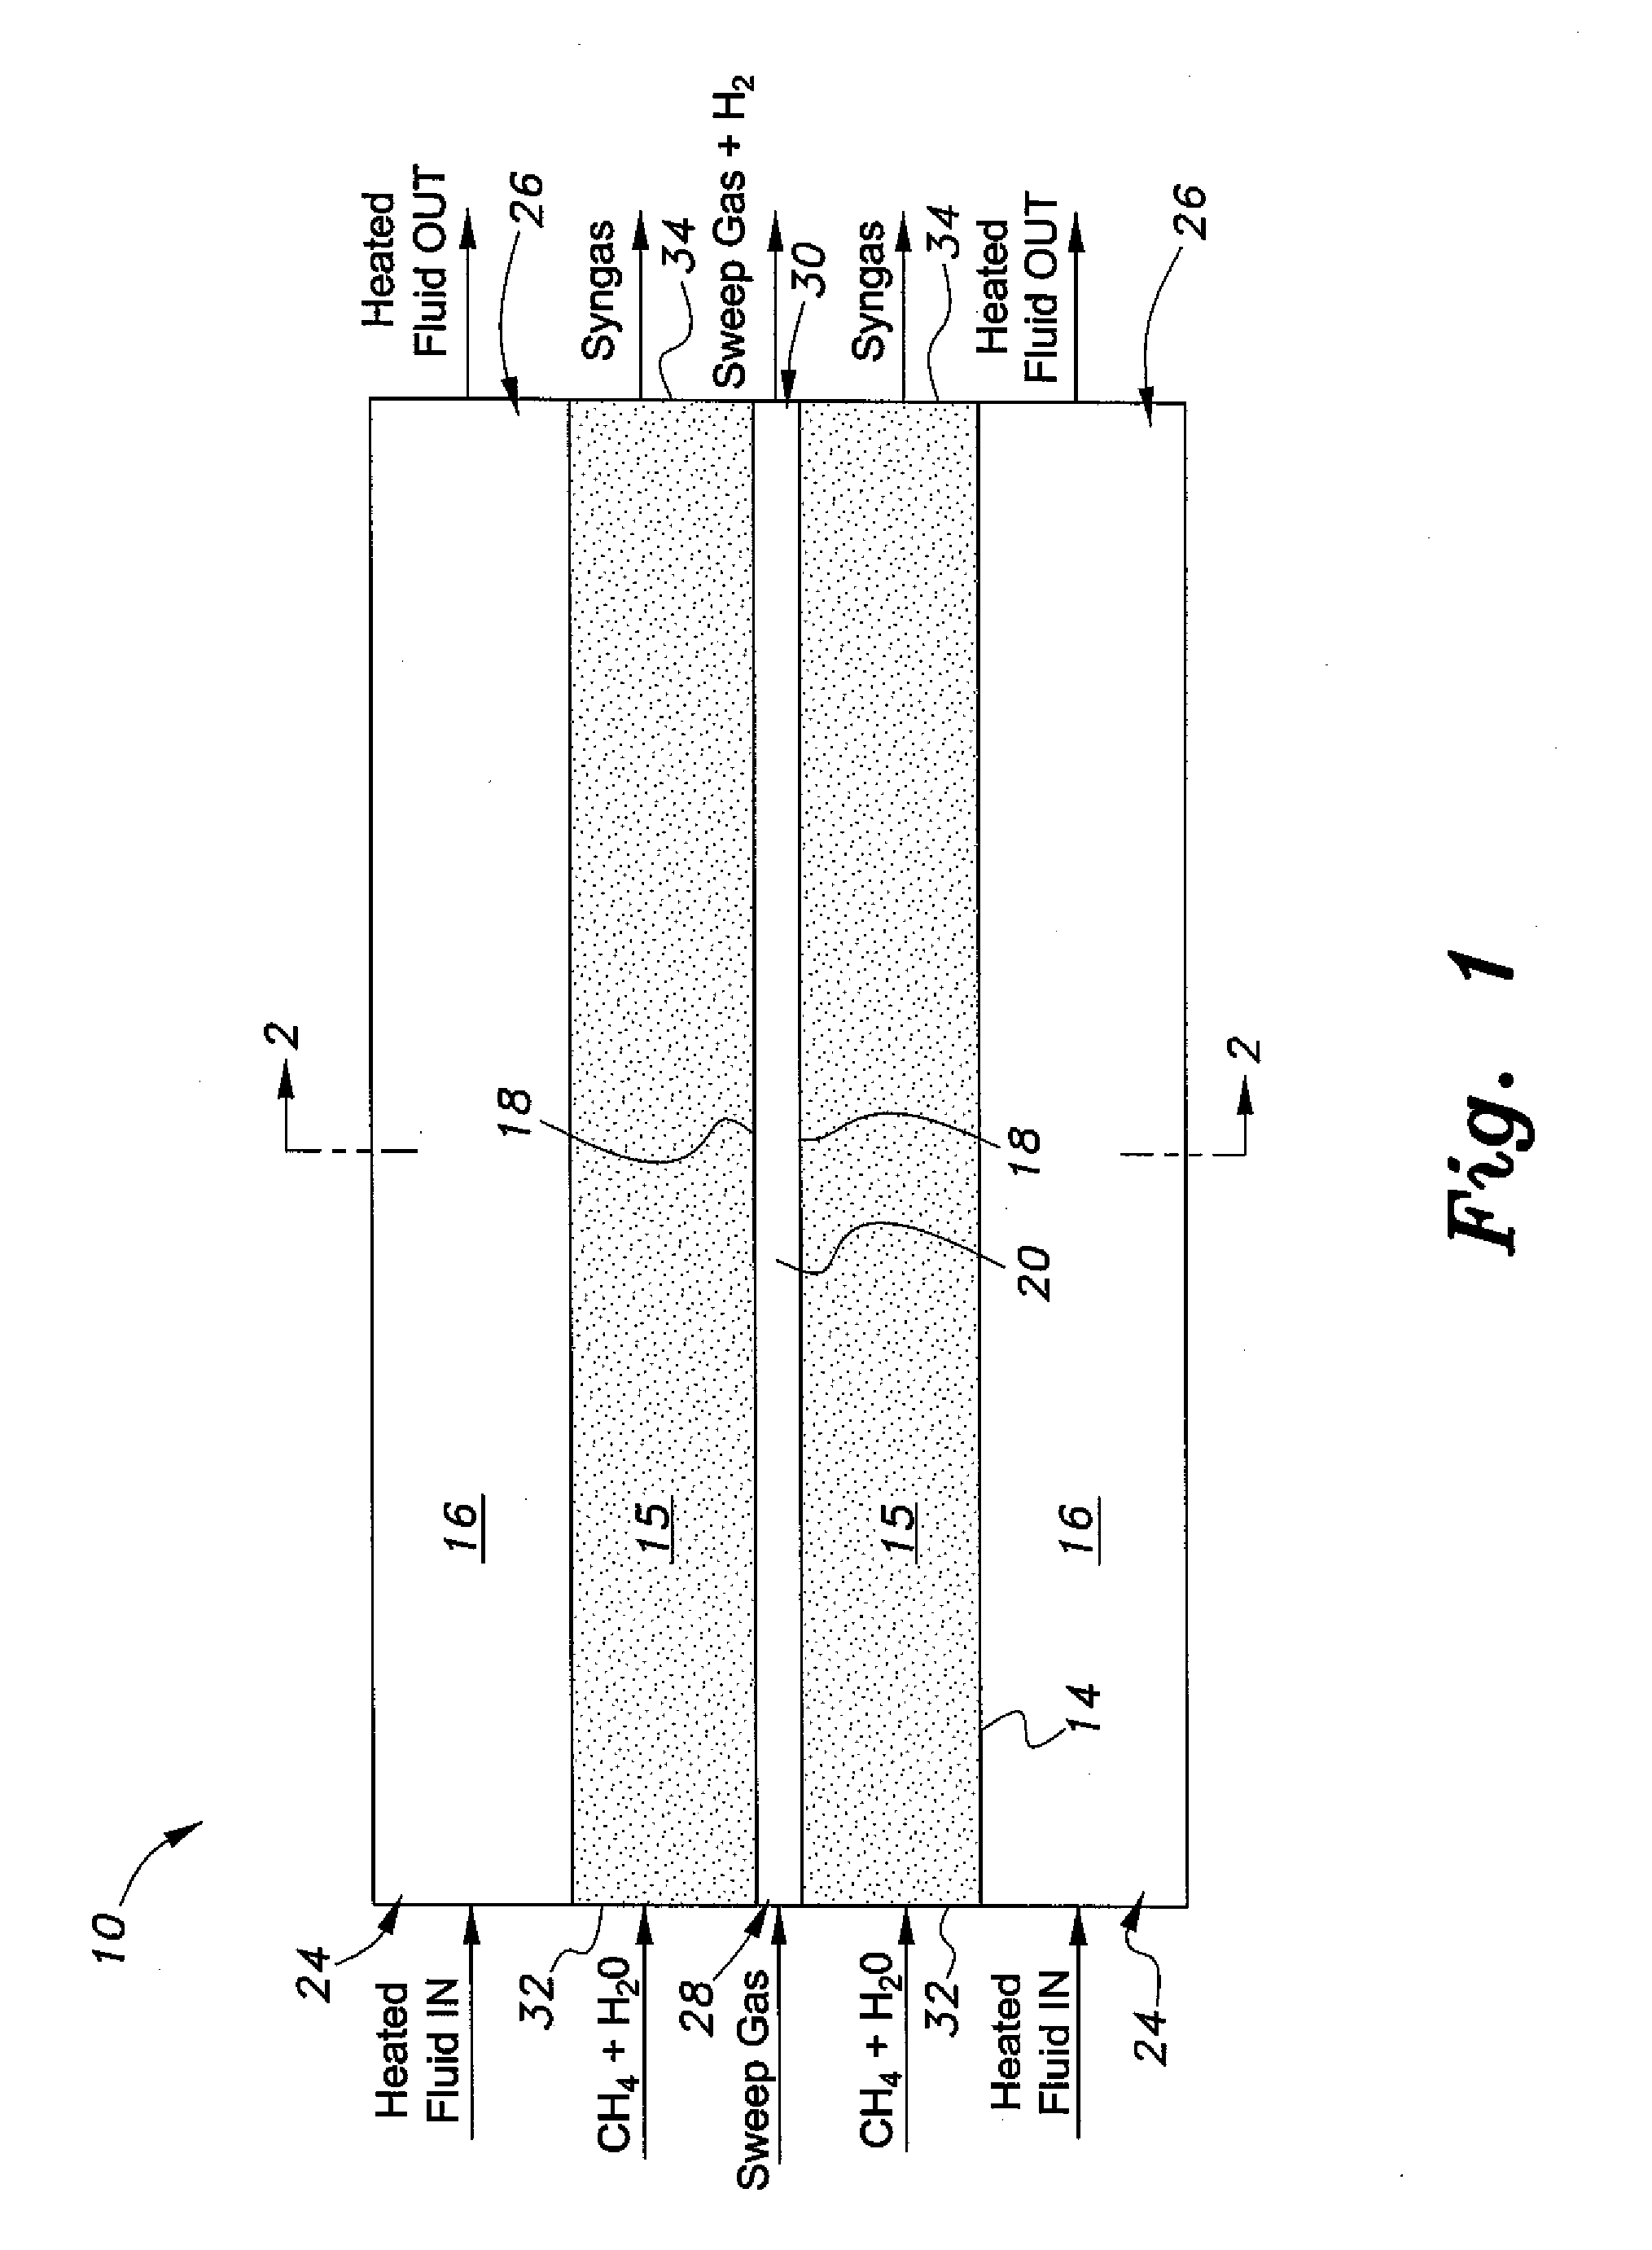 Steam methane reforming reactor with hydrogen selective membrane